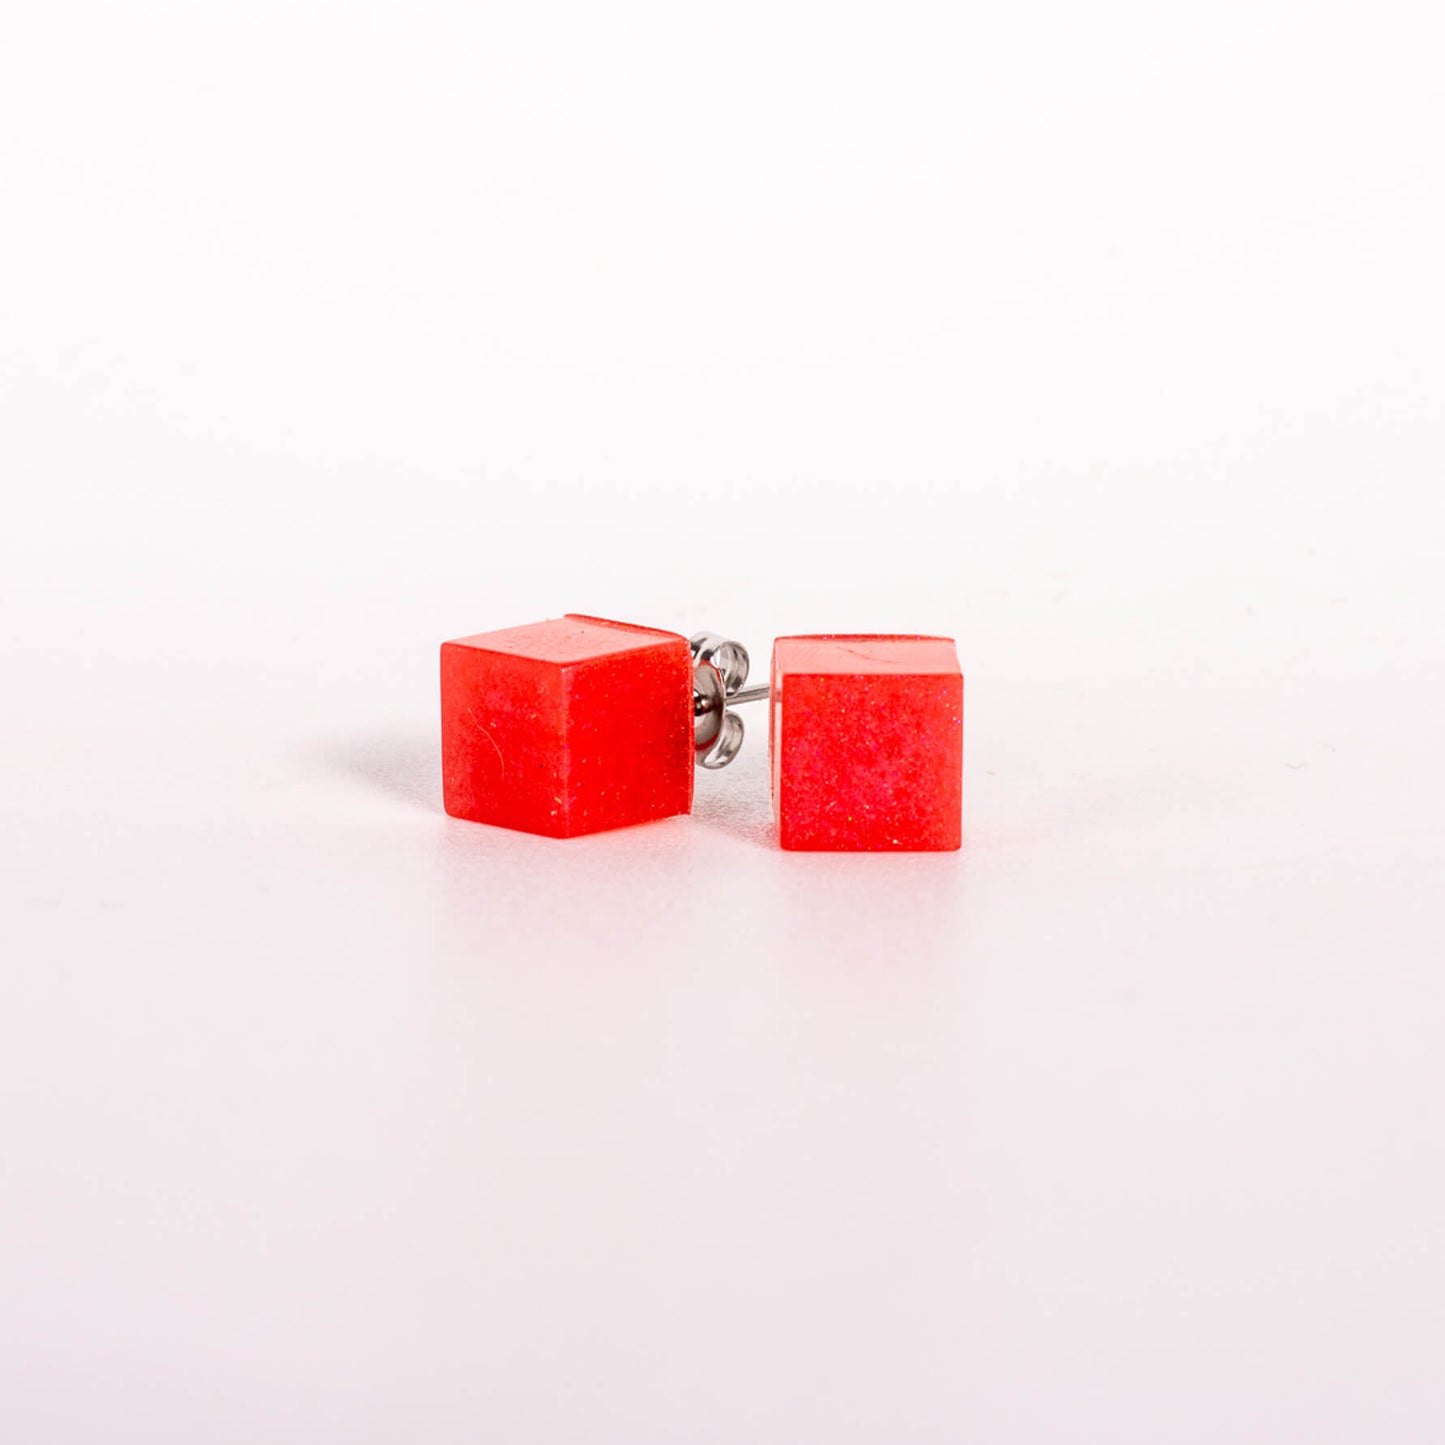 red cube earrings on surgical steel posts